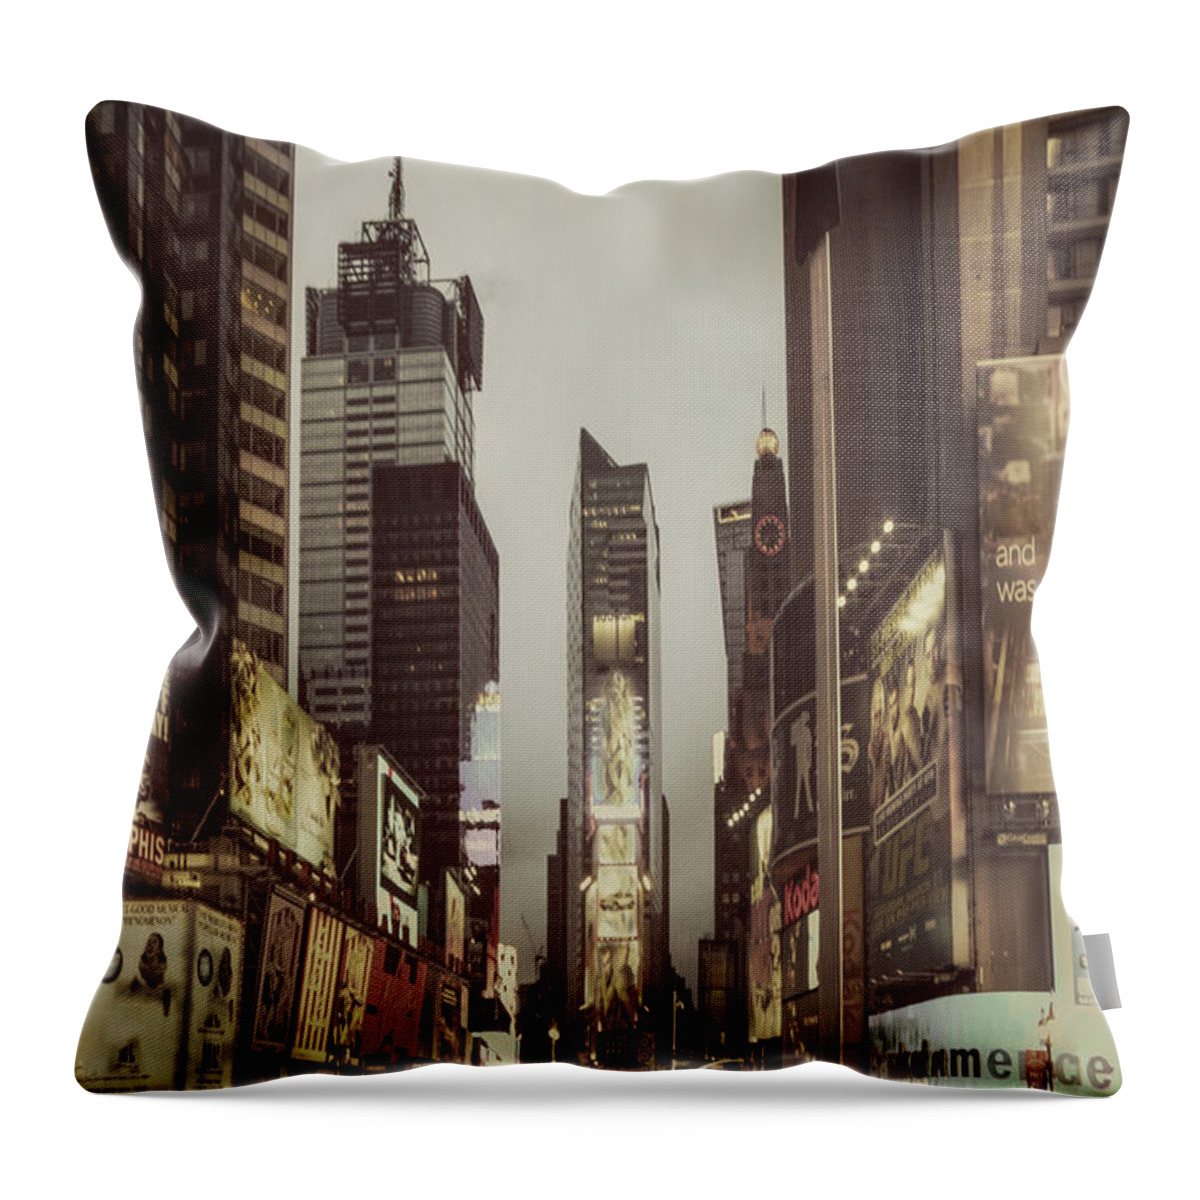 Kremsdorf Throw Pillow featuring the photograph Into A Sea Of Souls by Evelina Kremsdorf